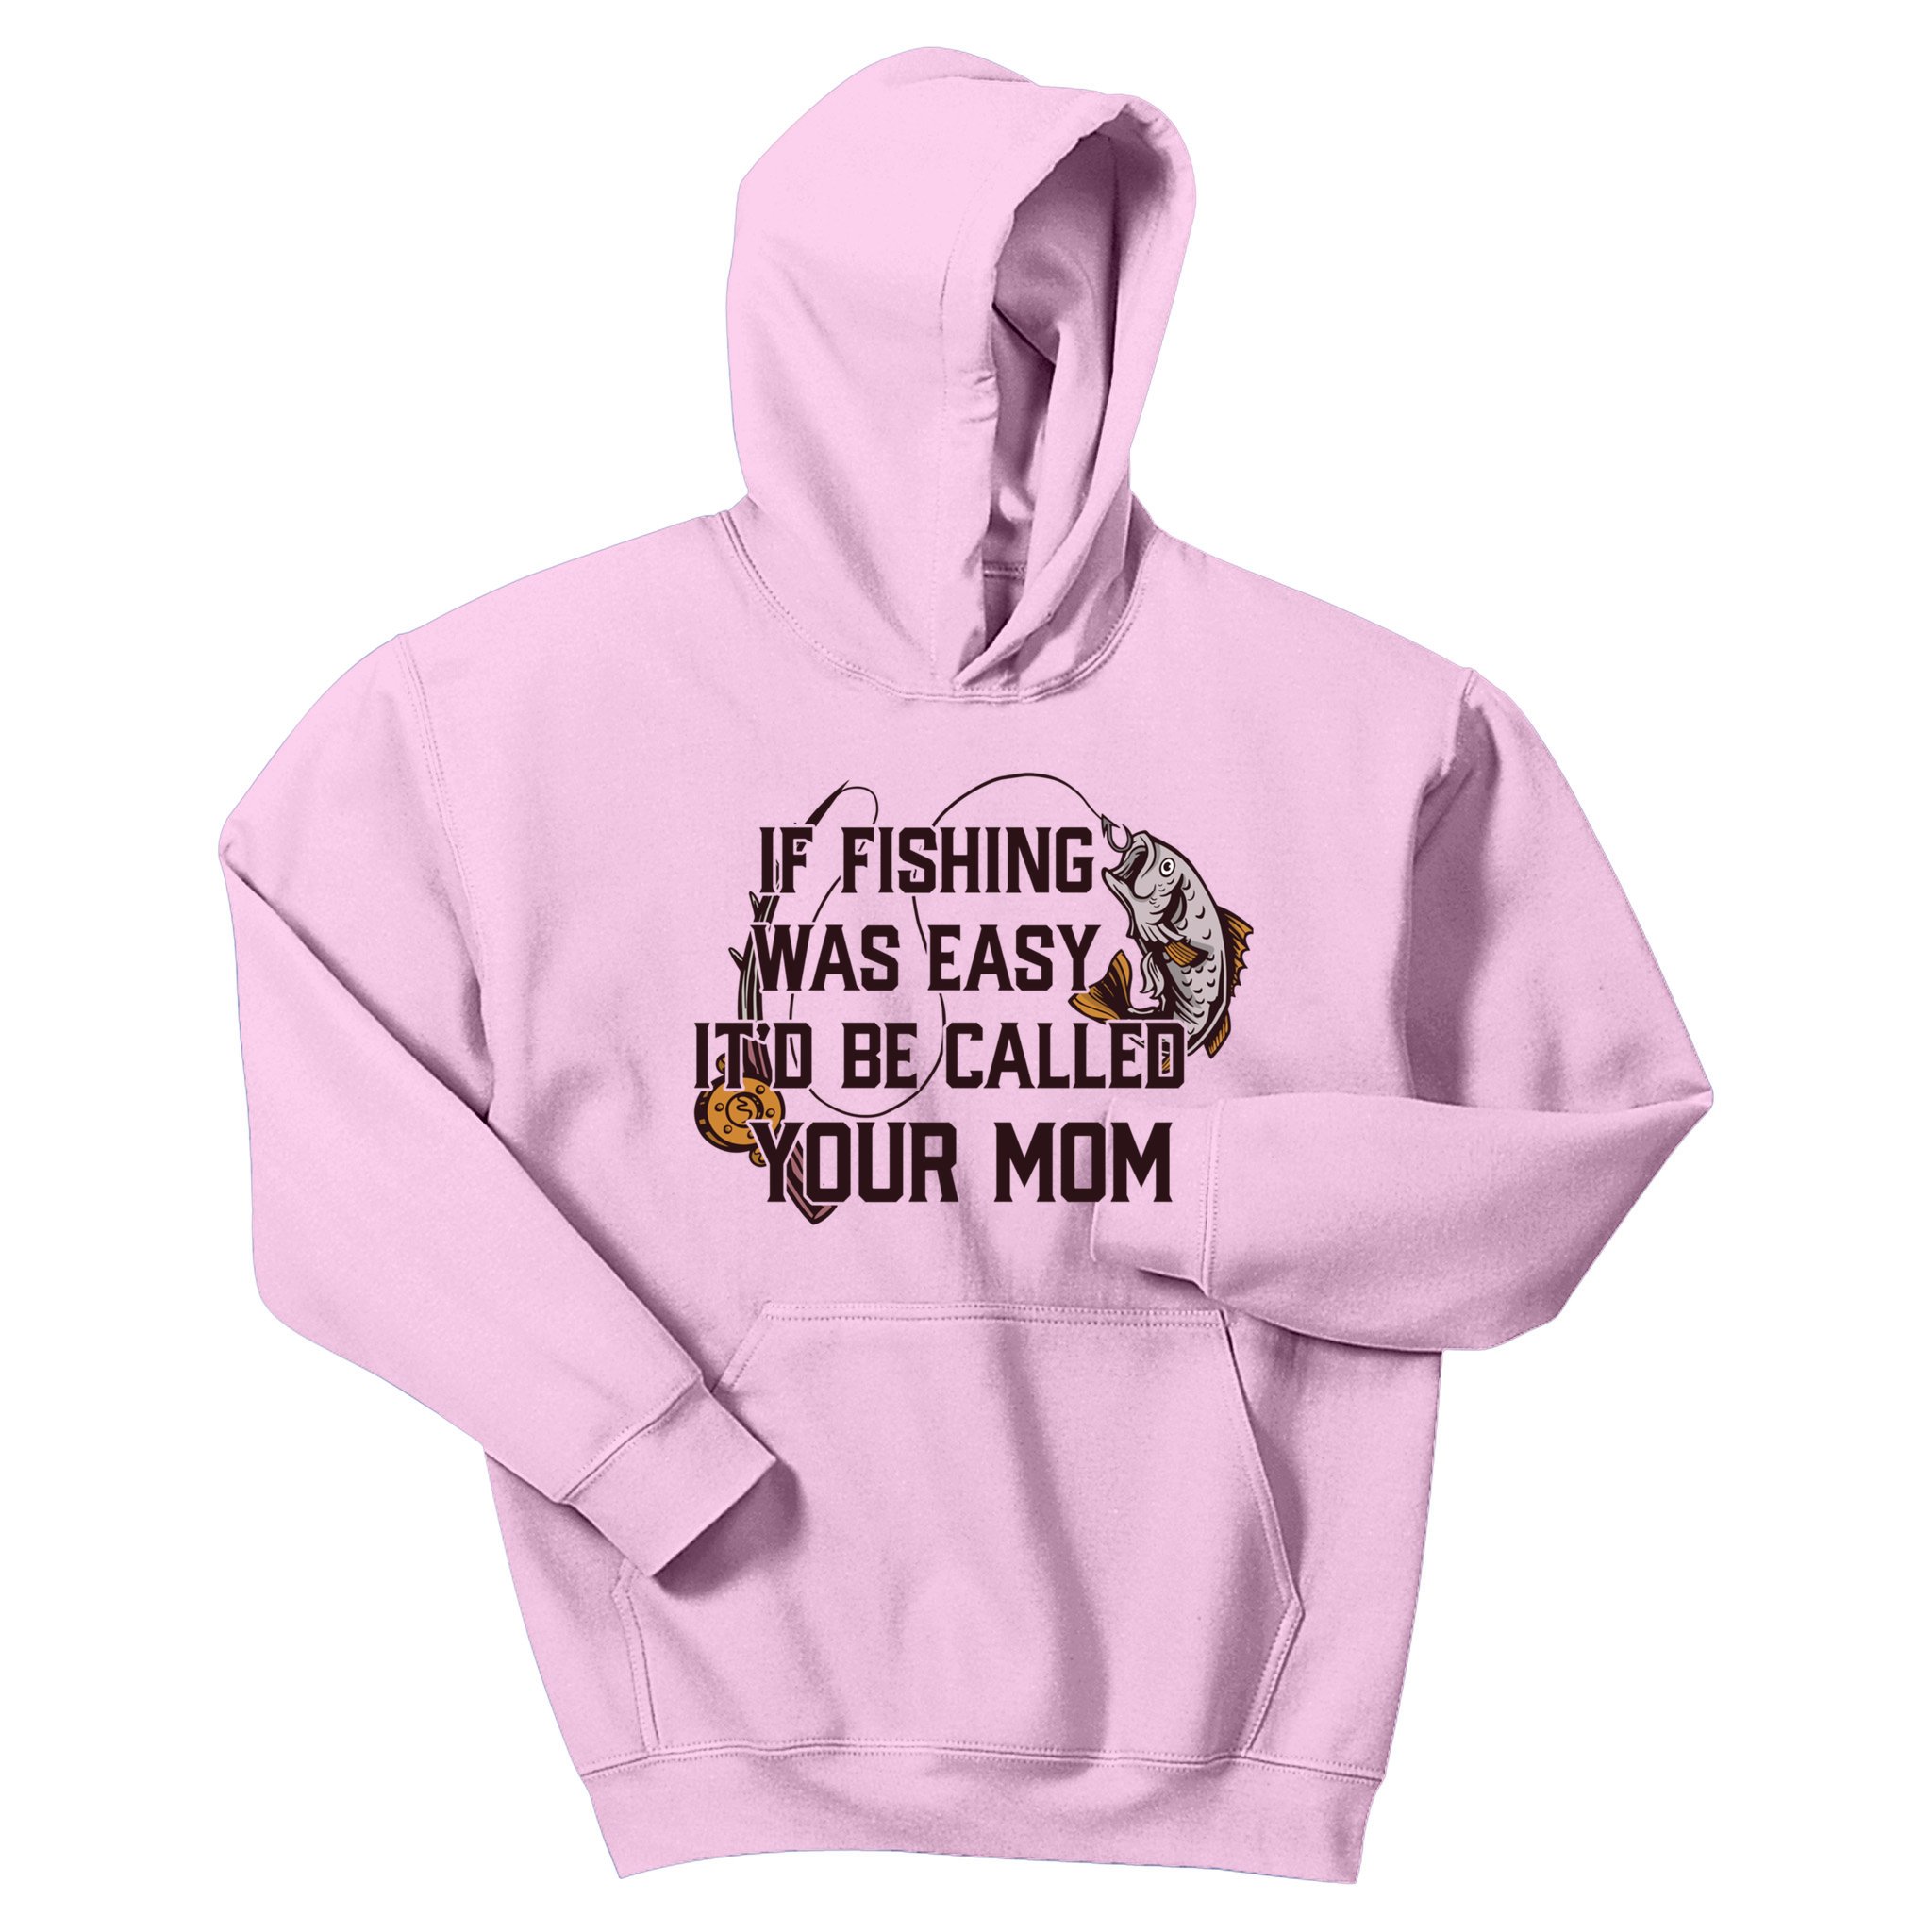 If Fishing Was Easy It'd Be Called Your Mom Funny Fish Meme Gift